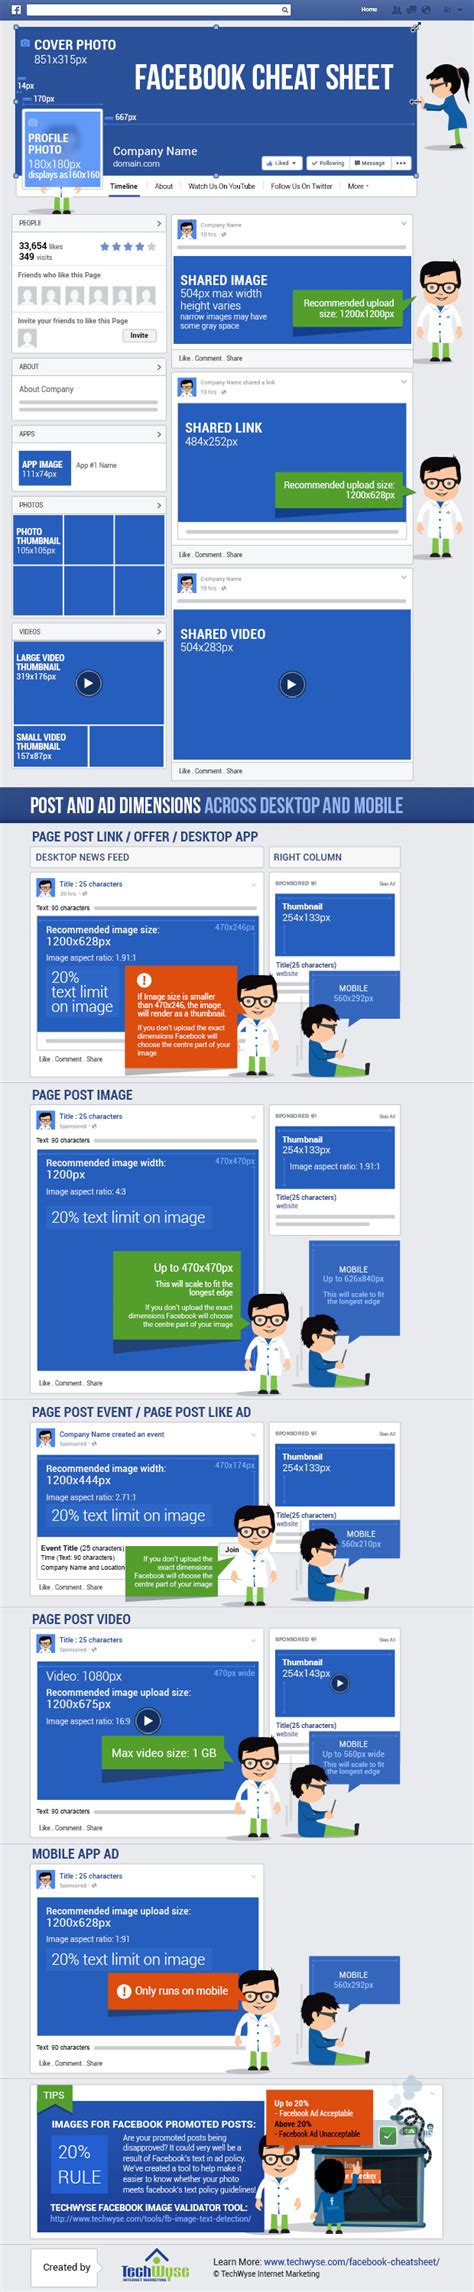 The Ultimate Guide On Facebook Dimensions For All Page And Feed Images